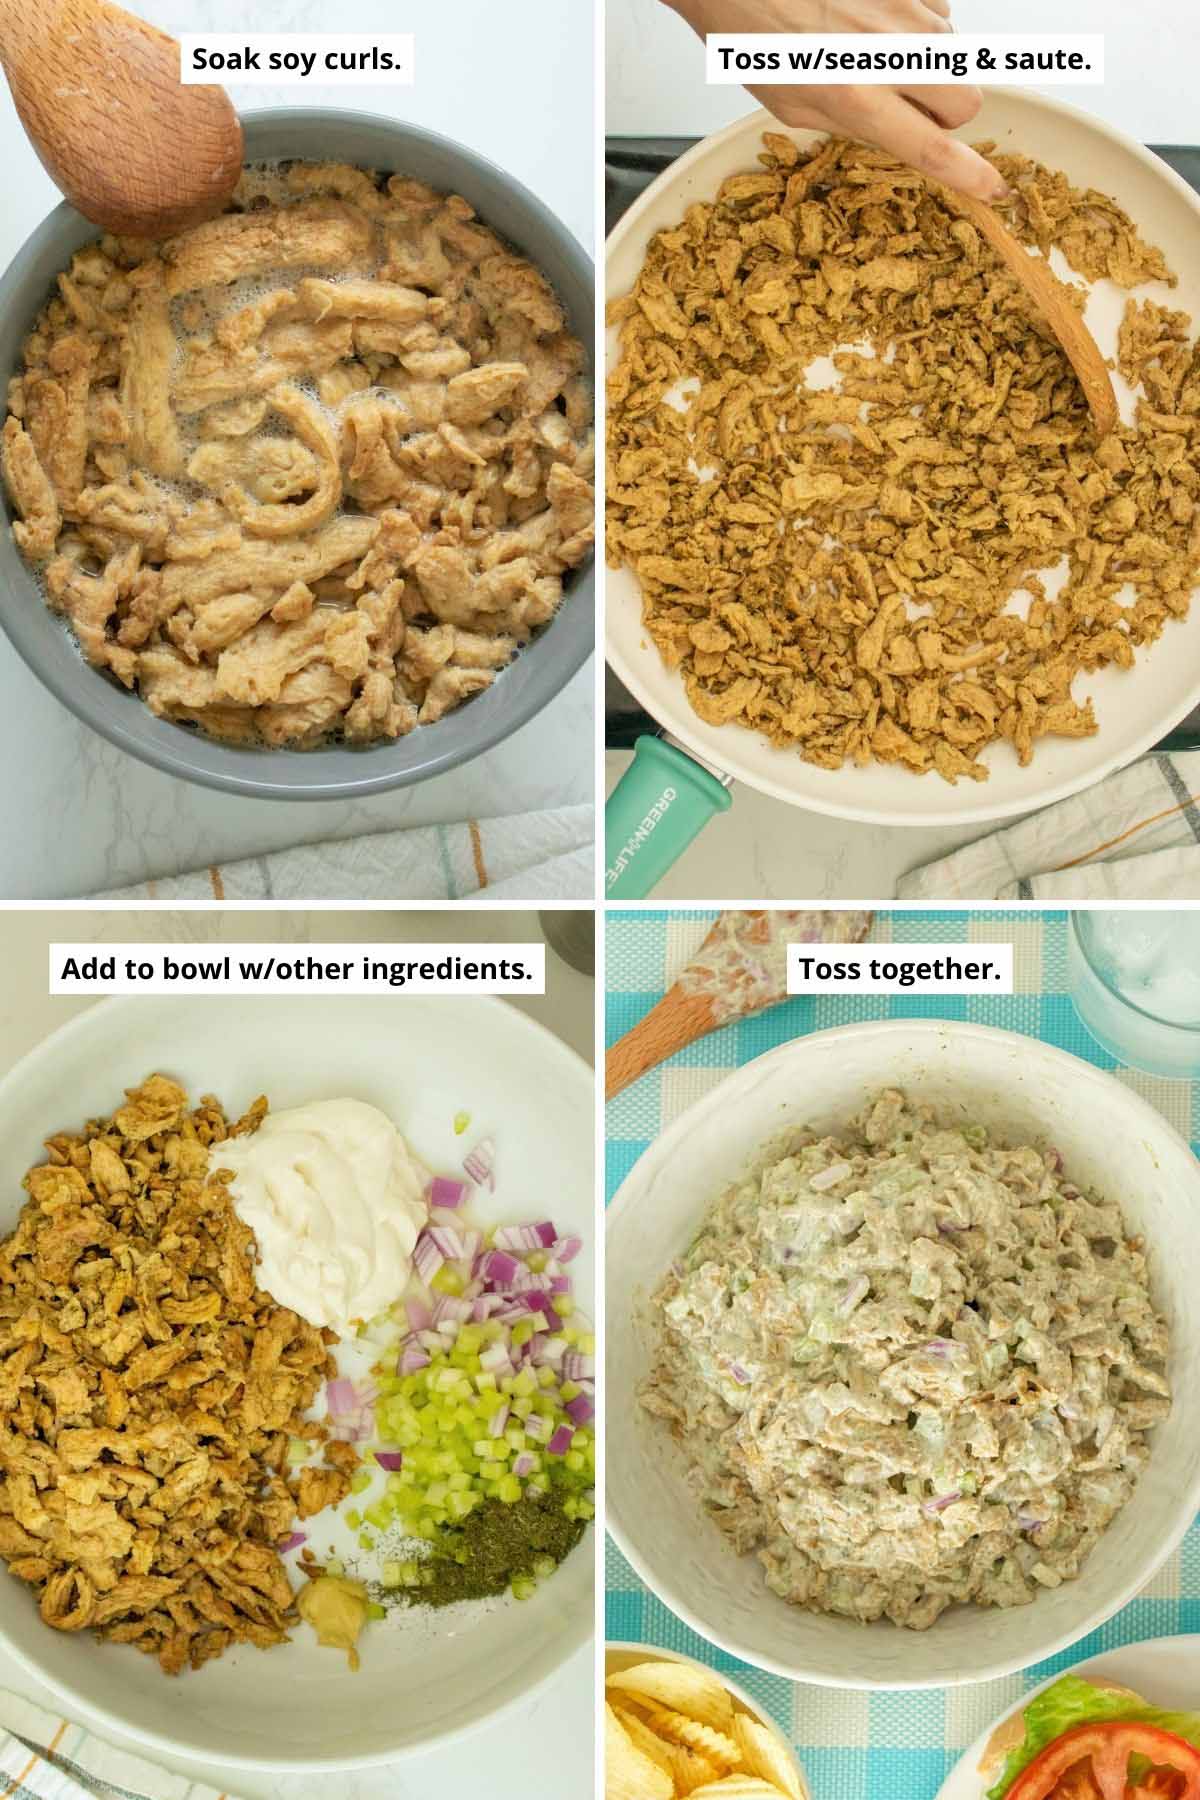 image collage showing soaking soy curls, sautéing them in a pan, the vegan chicken salad ingredients in the bowl before and after mixing